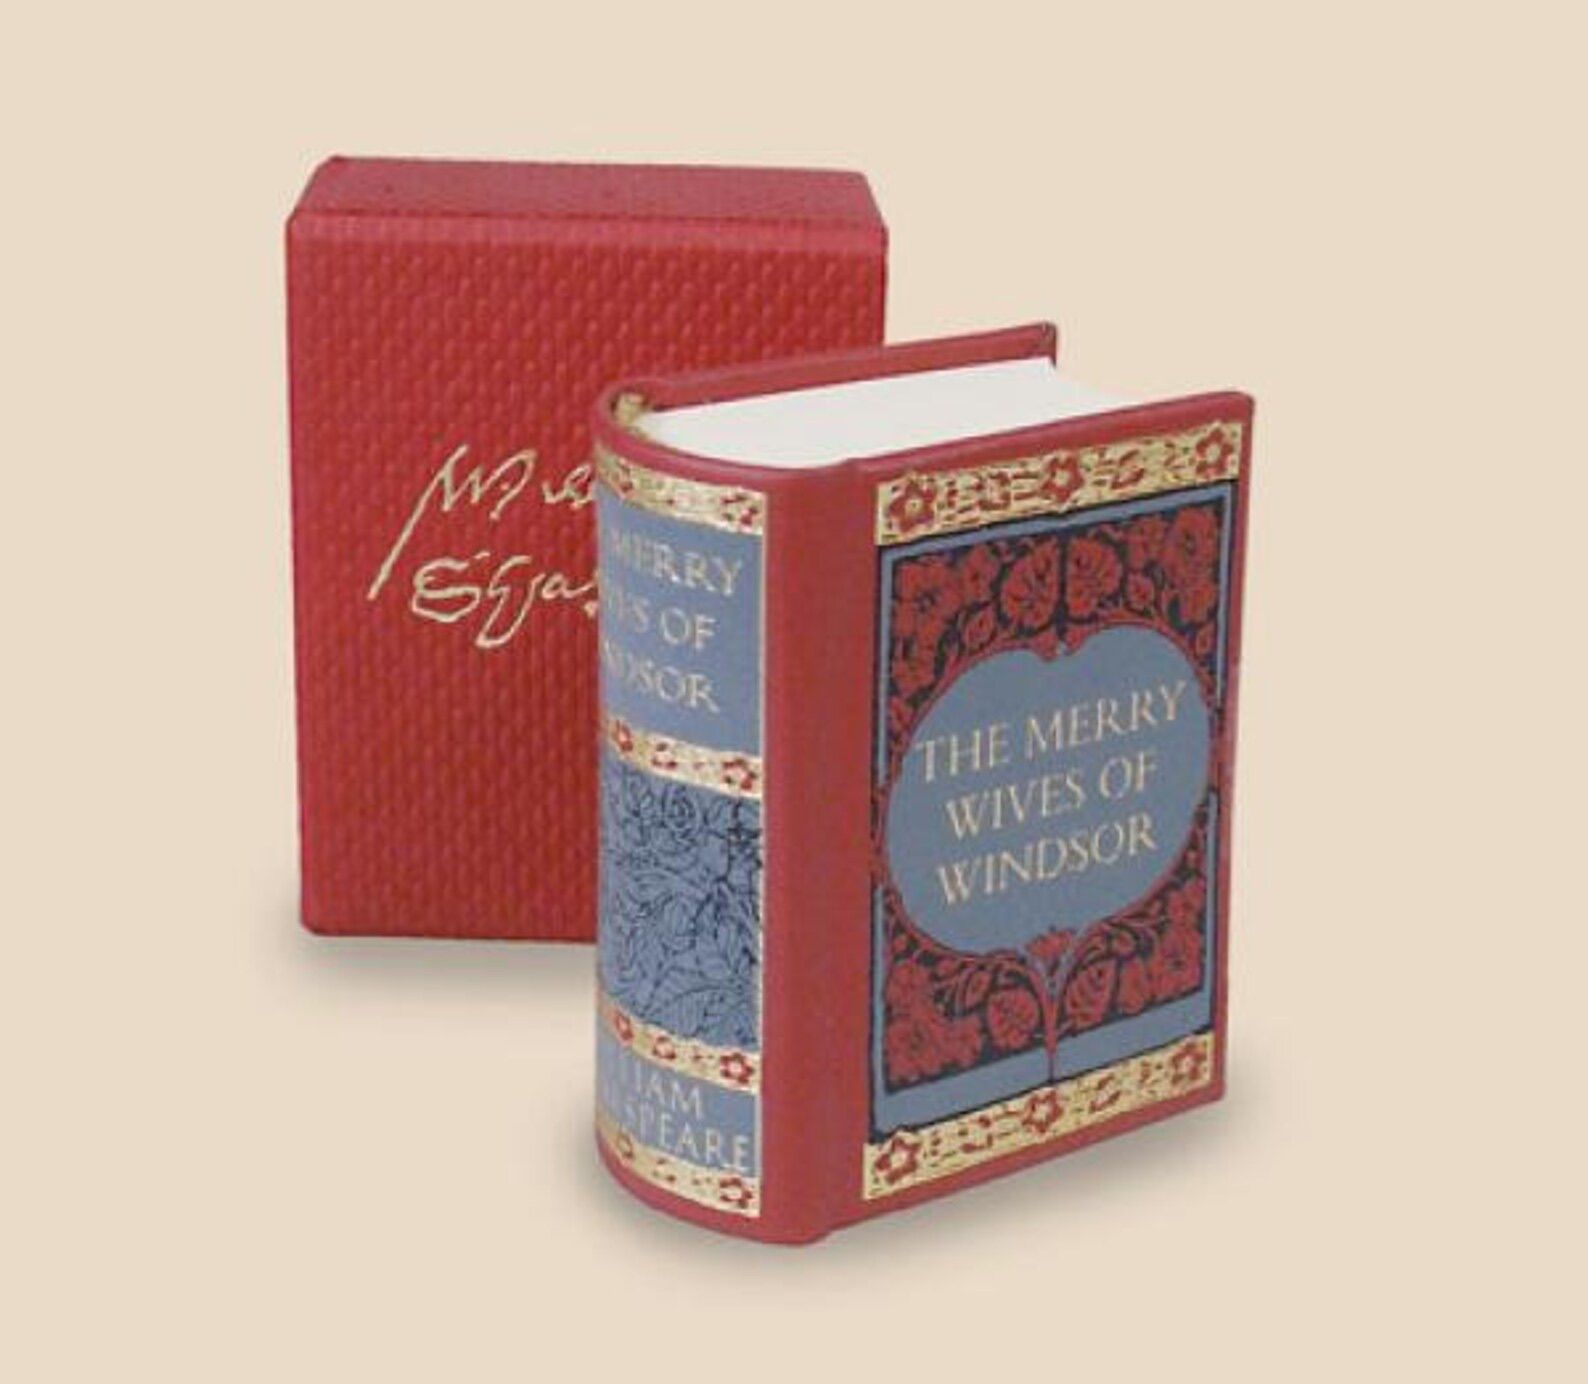 Merry Wives of Windsor by William Shakespeare Miniature Book